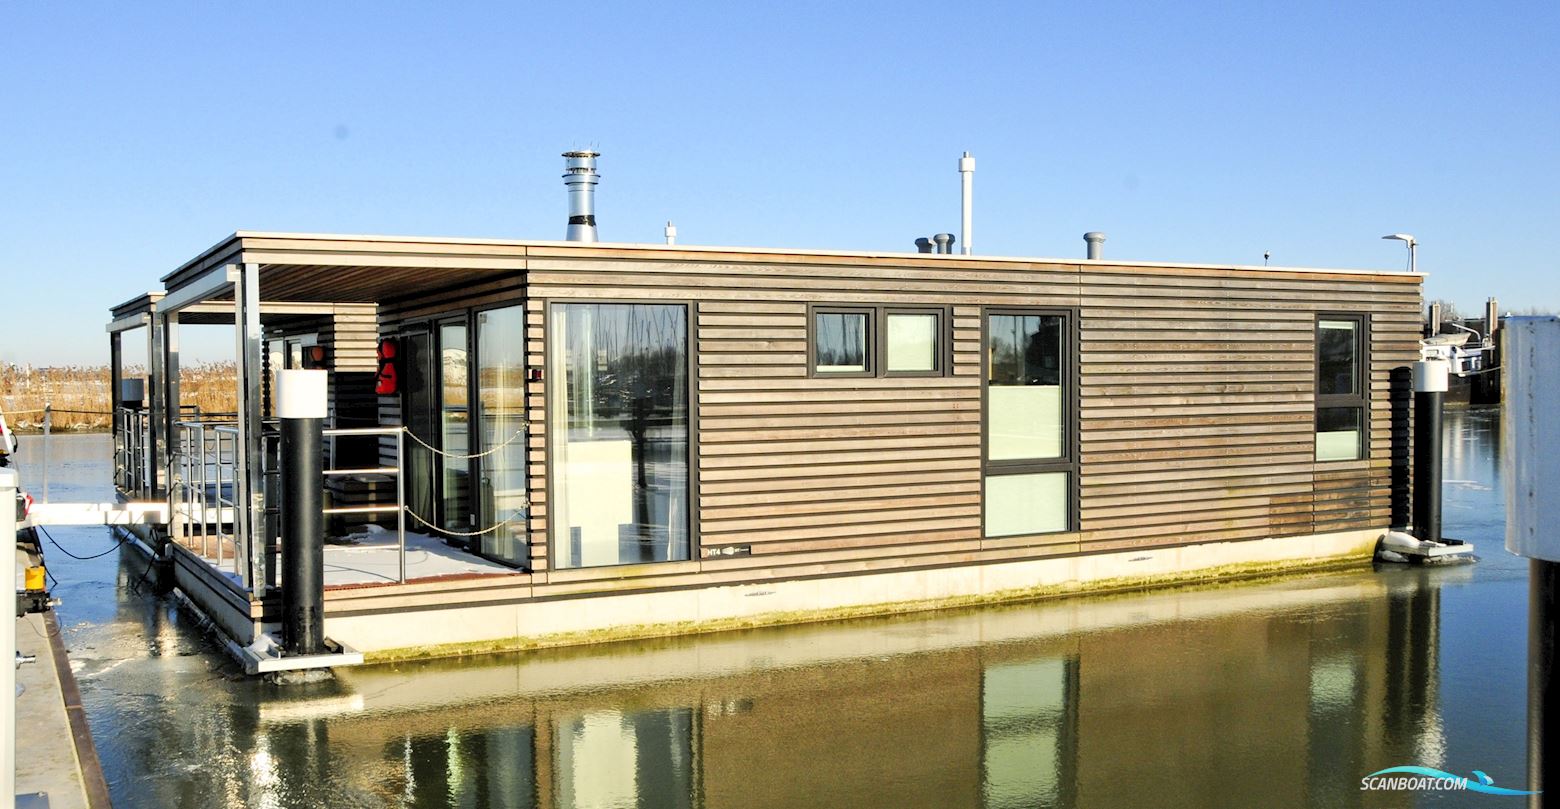 HT4 Houseboat Mermaid 2 With Charter Live a board / River boat 2019, The Netherlands